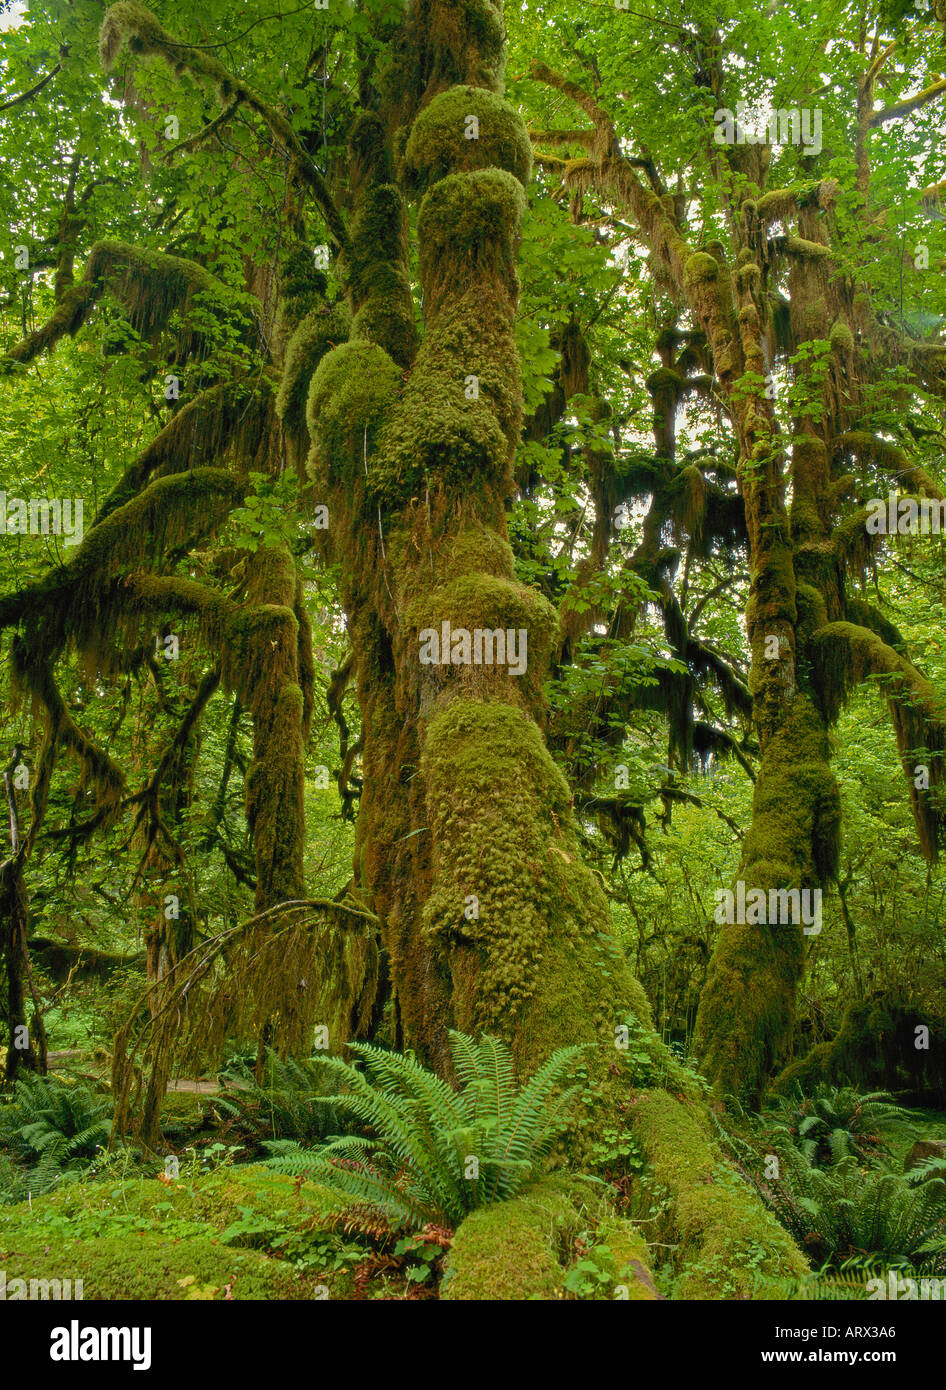 USA WASHINGTON, Olympic National Park, Hoh Rainforest, HALL OF MOSSES moss covered trees Stock Photo